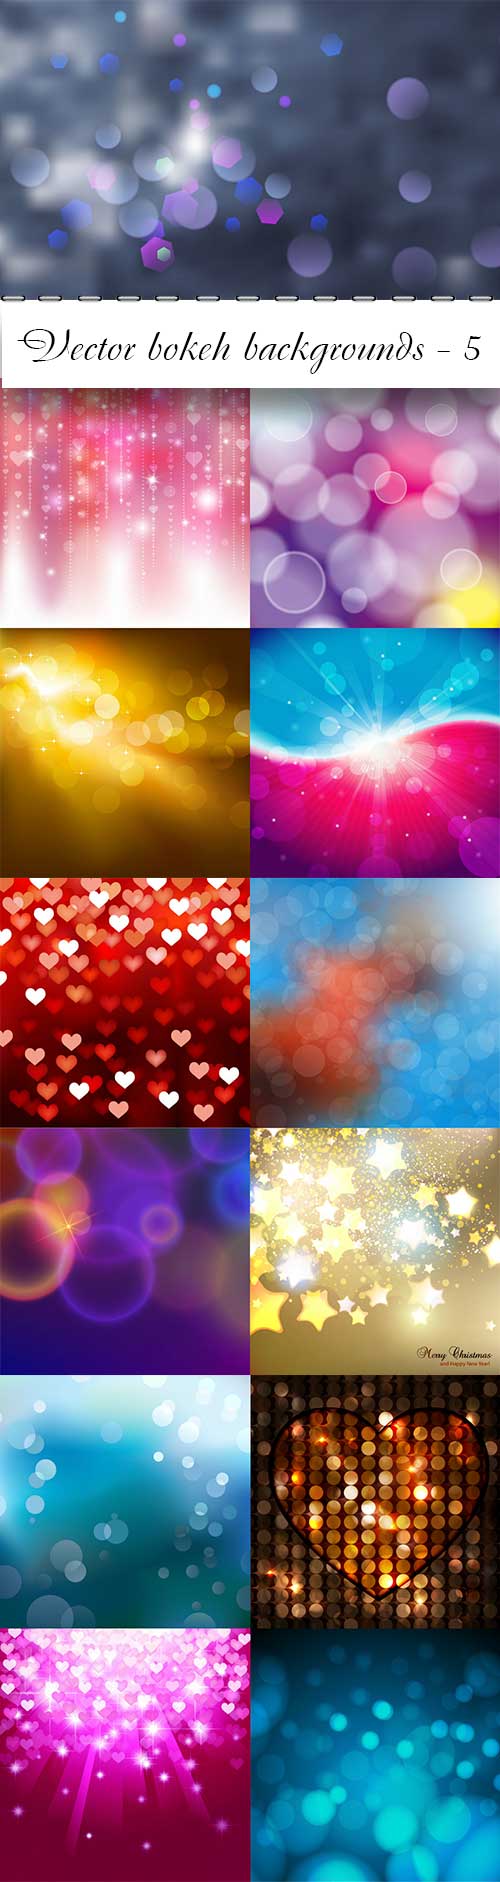 Vector bokeh colorful backgrounds - 5